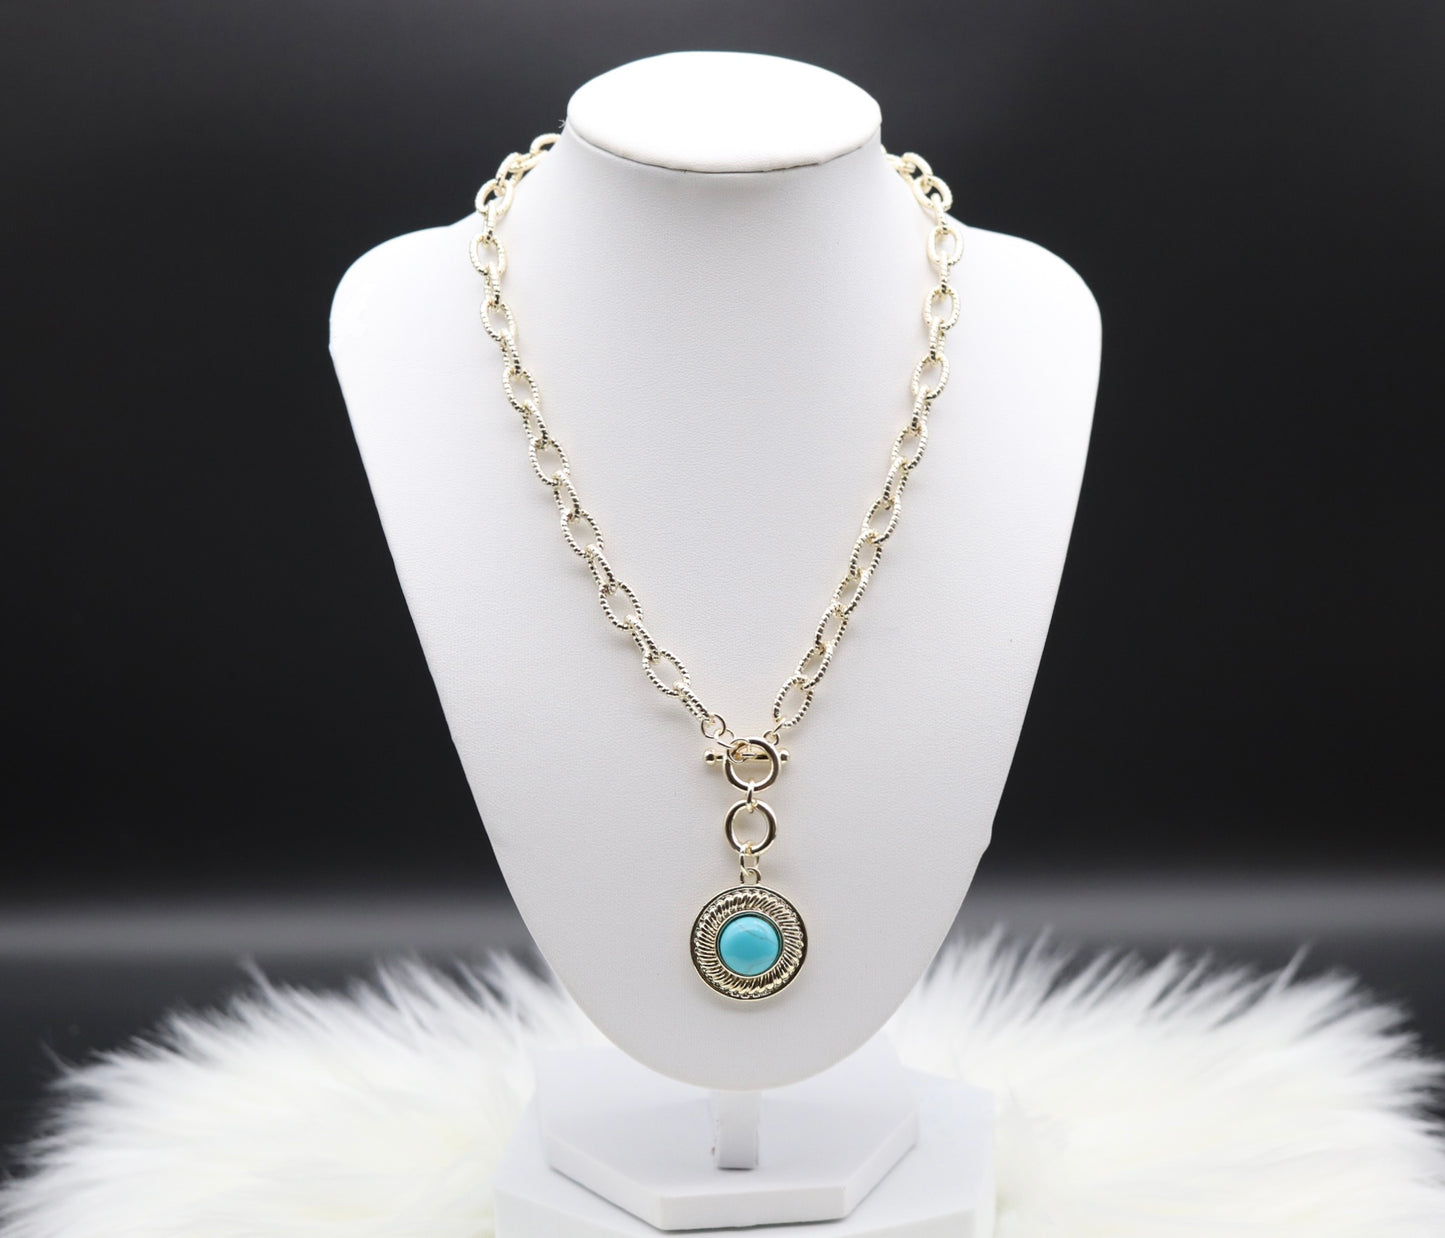 Gold Chain Necklace with Round Turquoise Pendant